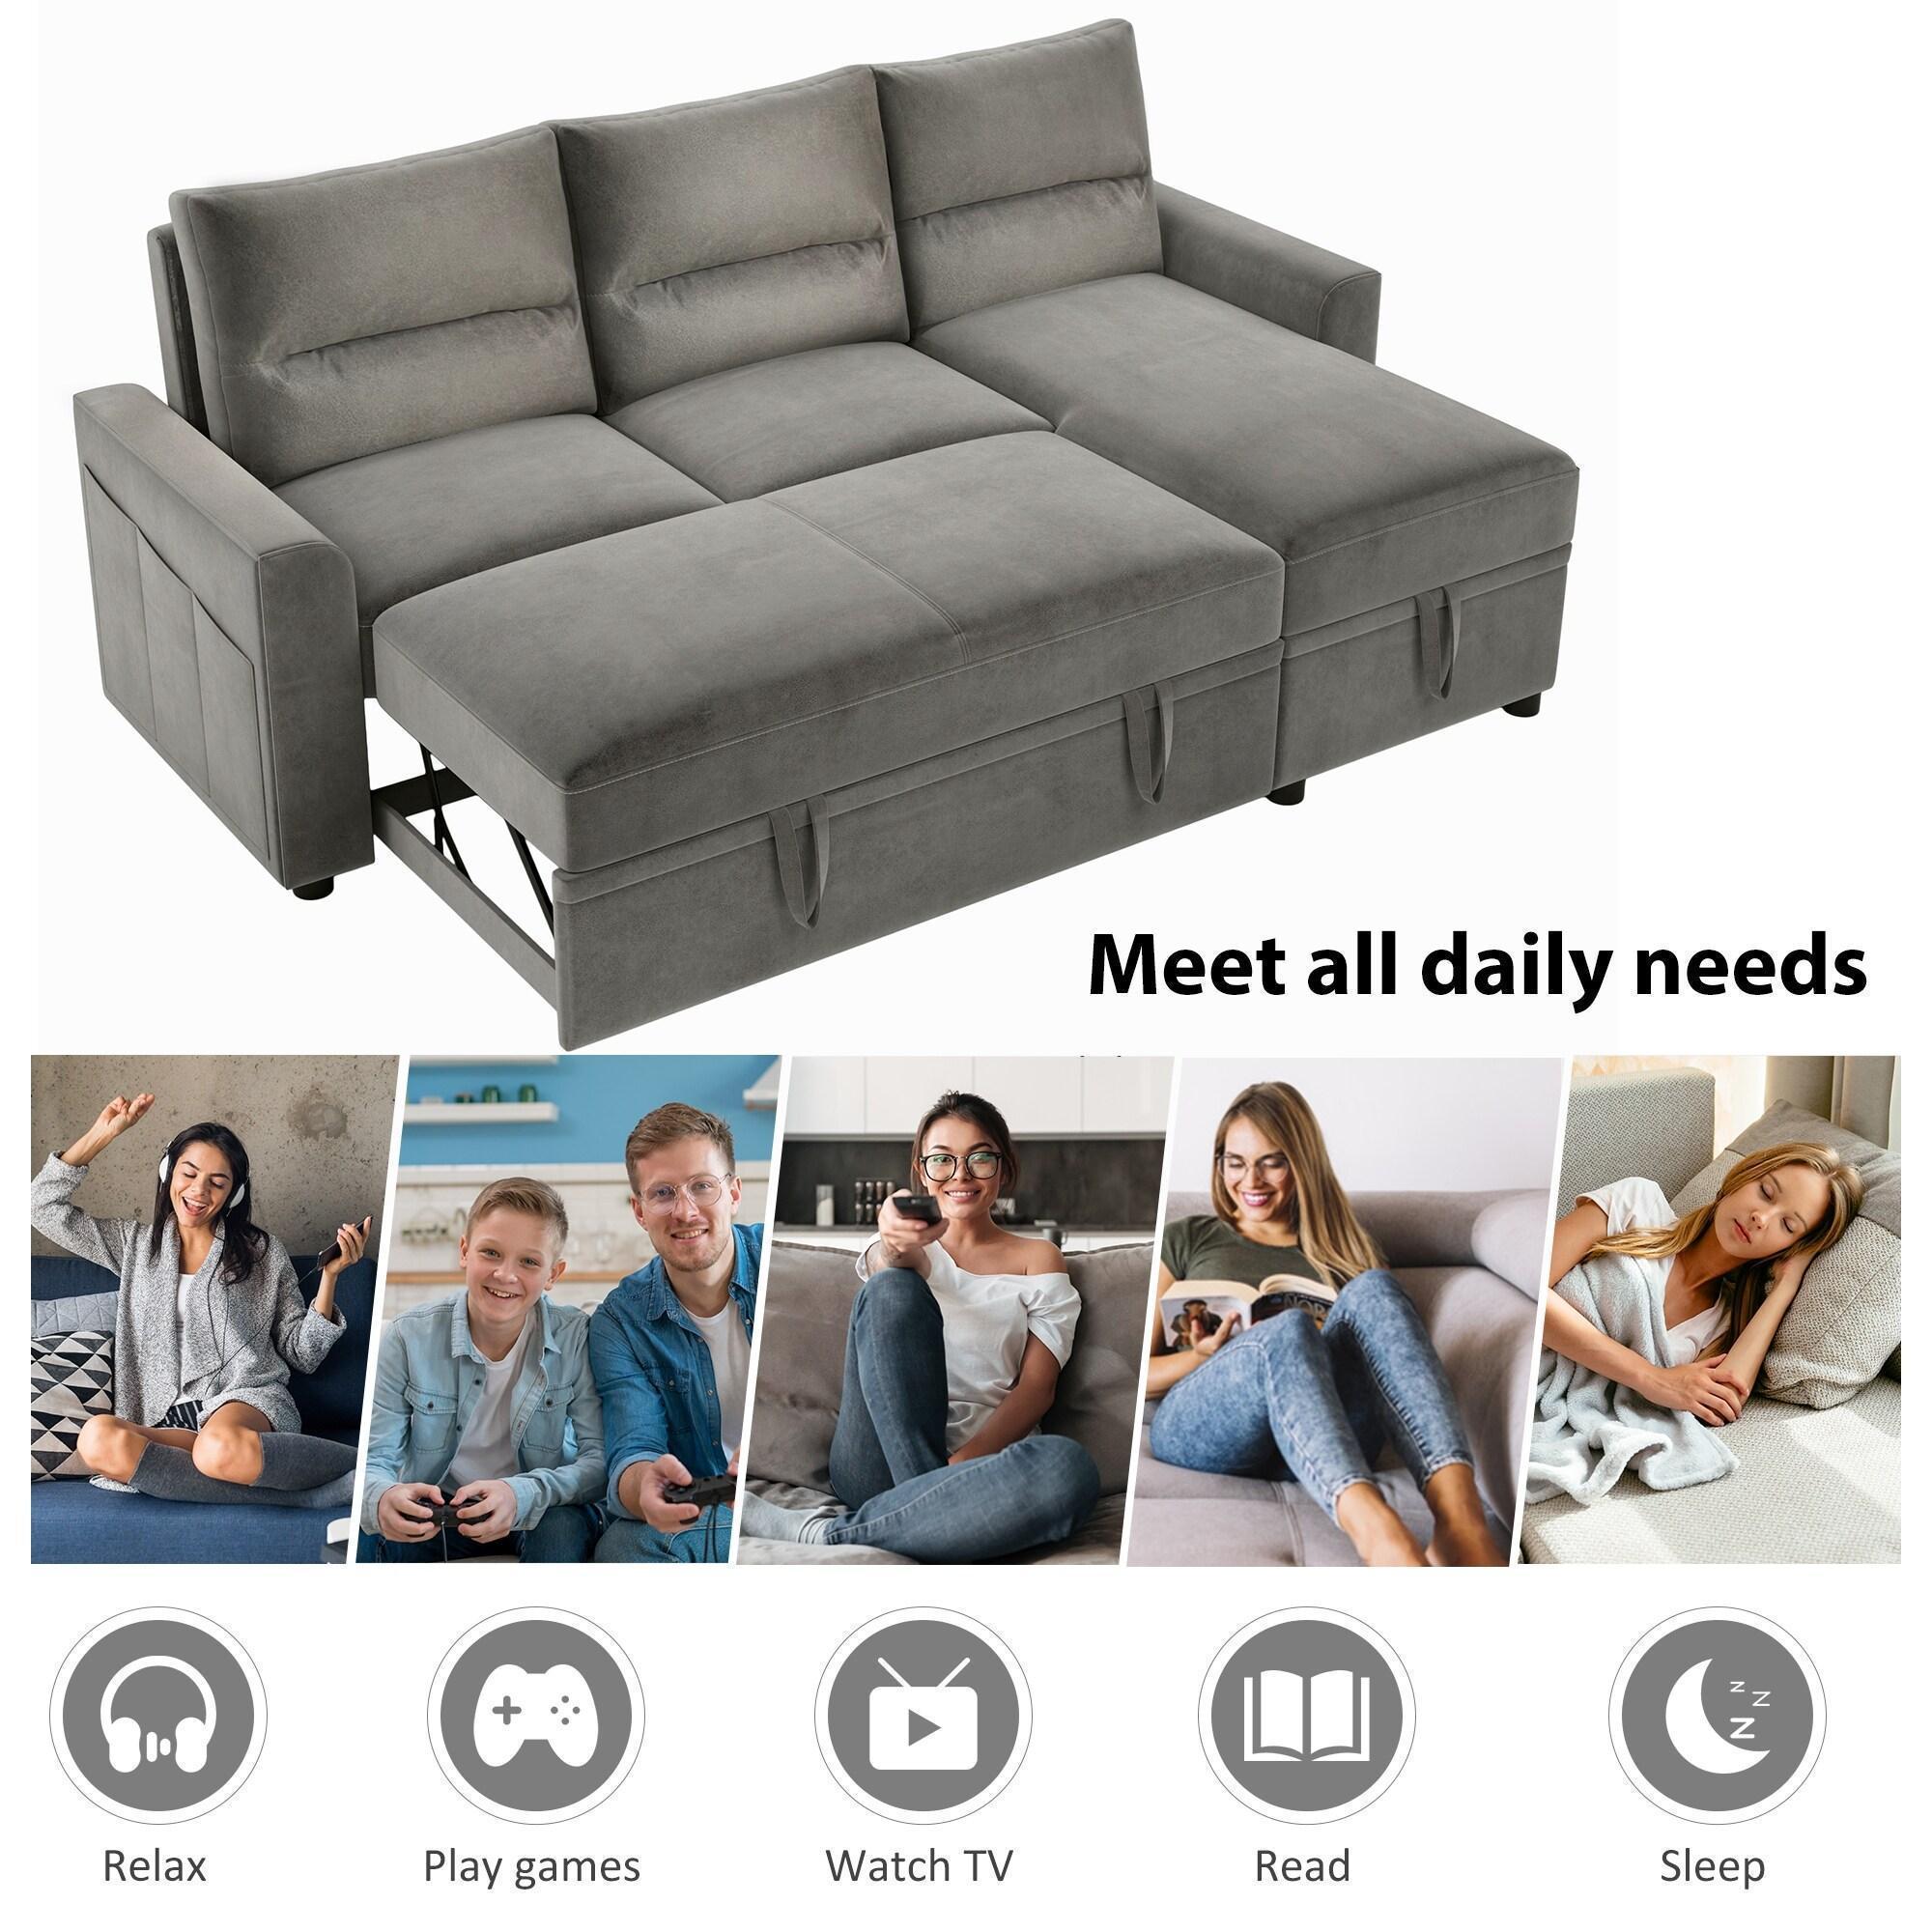 Reversible Sleeper Sectional Storage Sofa Bed Pull-Out,Corner Sofa-Bed with Storage,3 seat Both Left Handed and Right Handed Deals